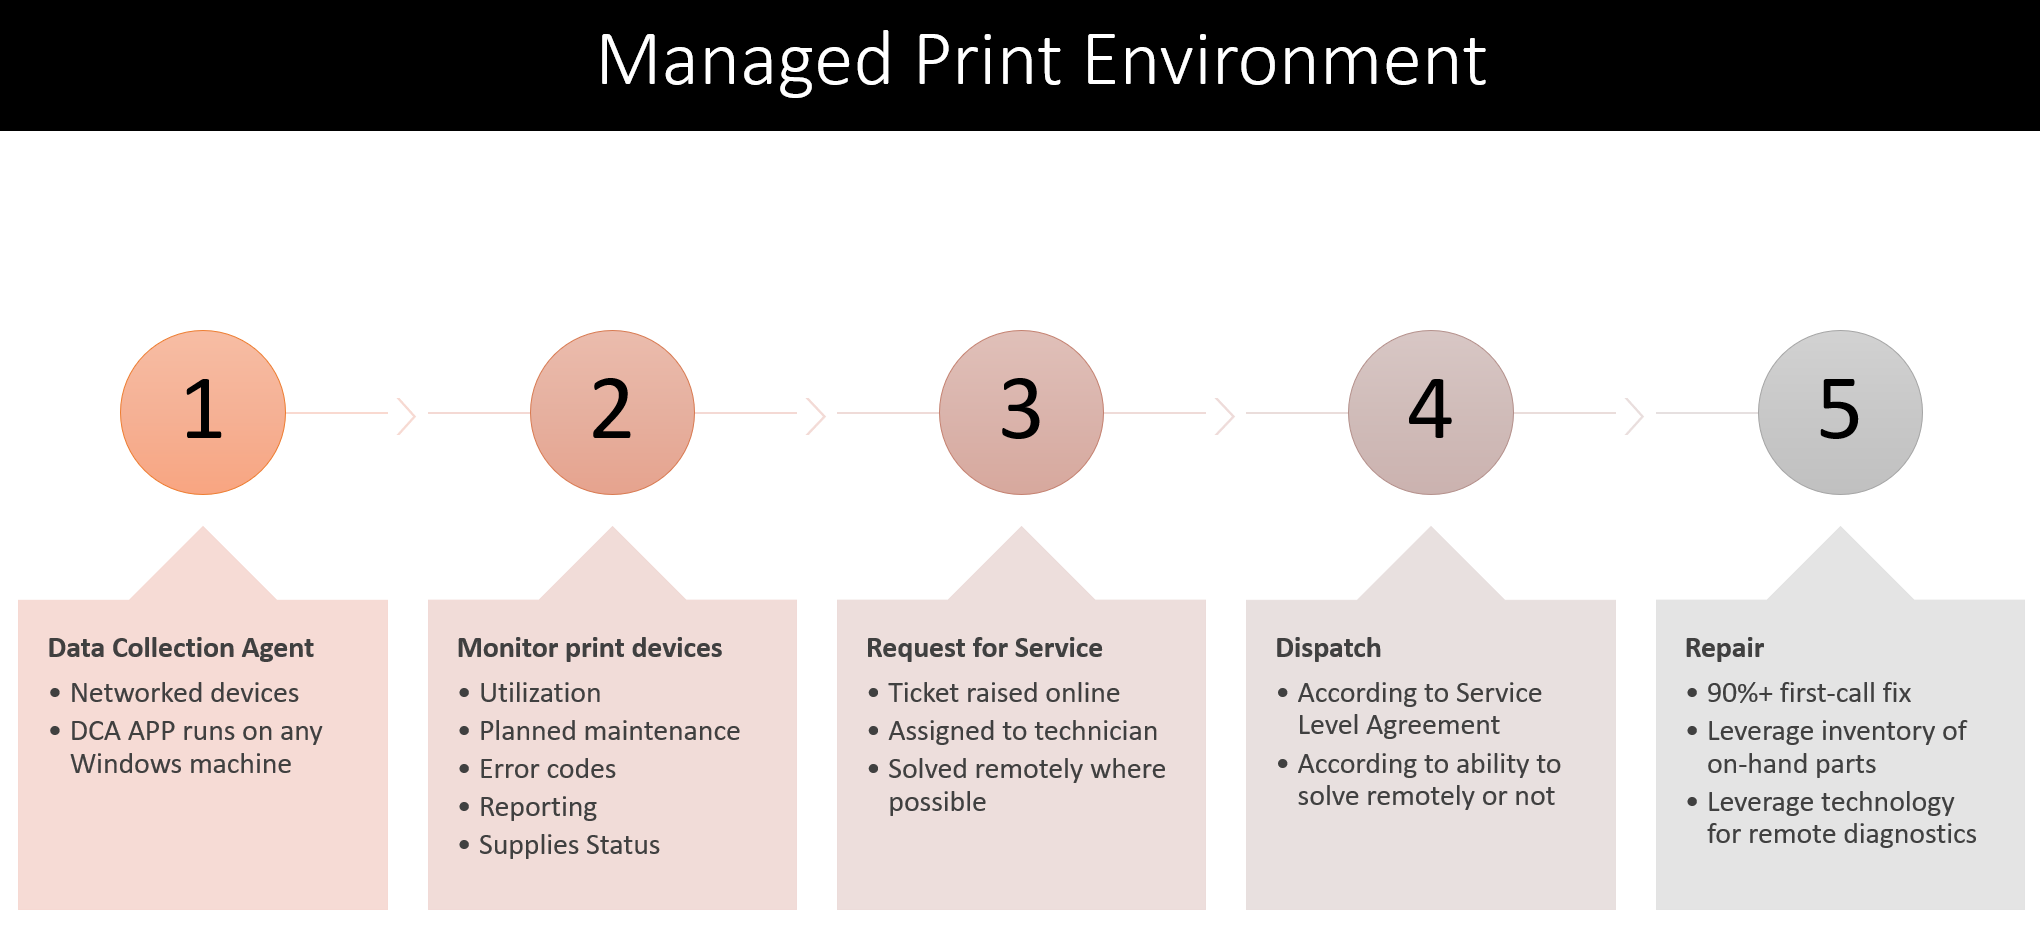 California Business Machines Managed Print Environment Process